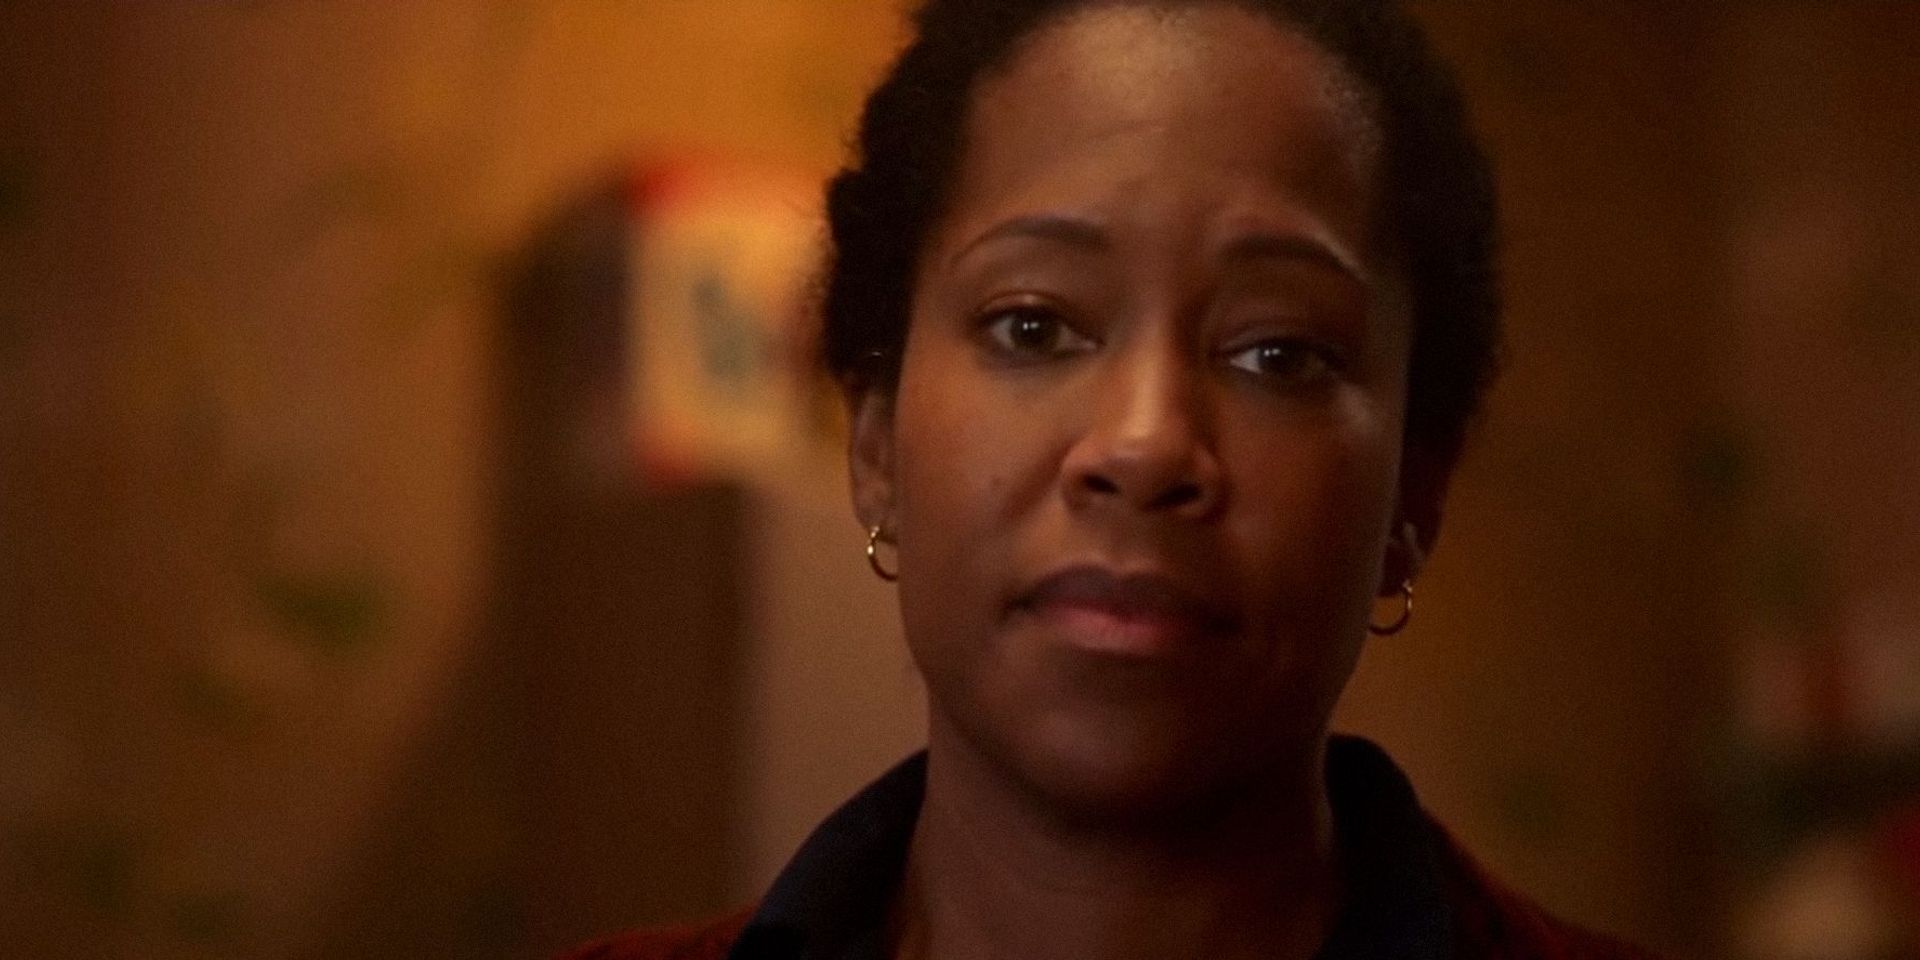 Regina King looks sadly forward in If Beale Street Could Talk